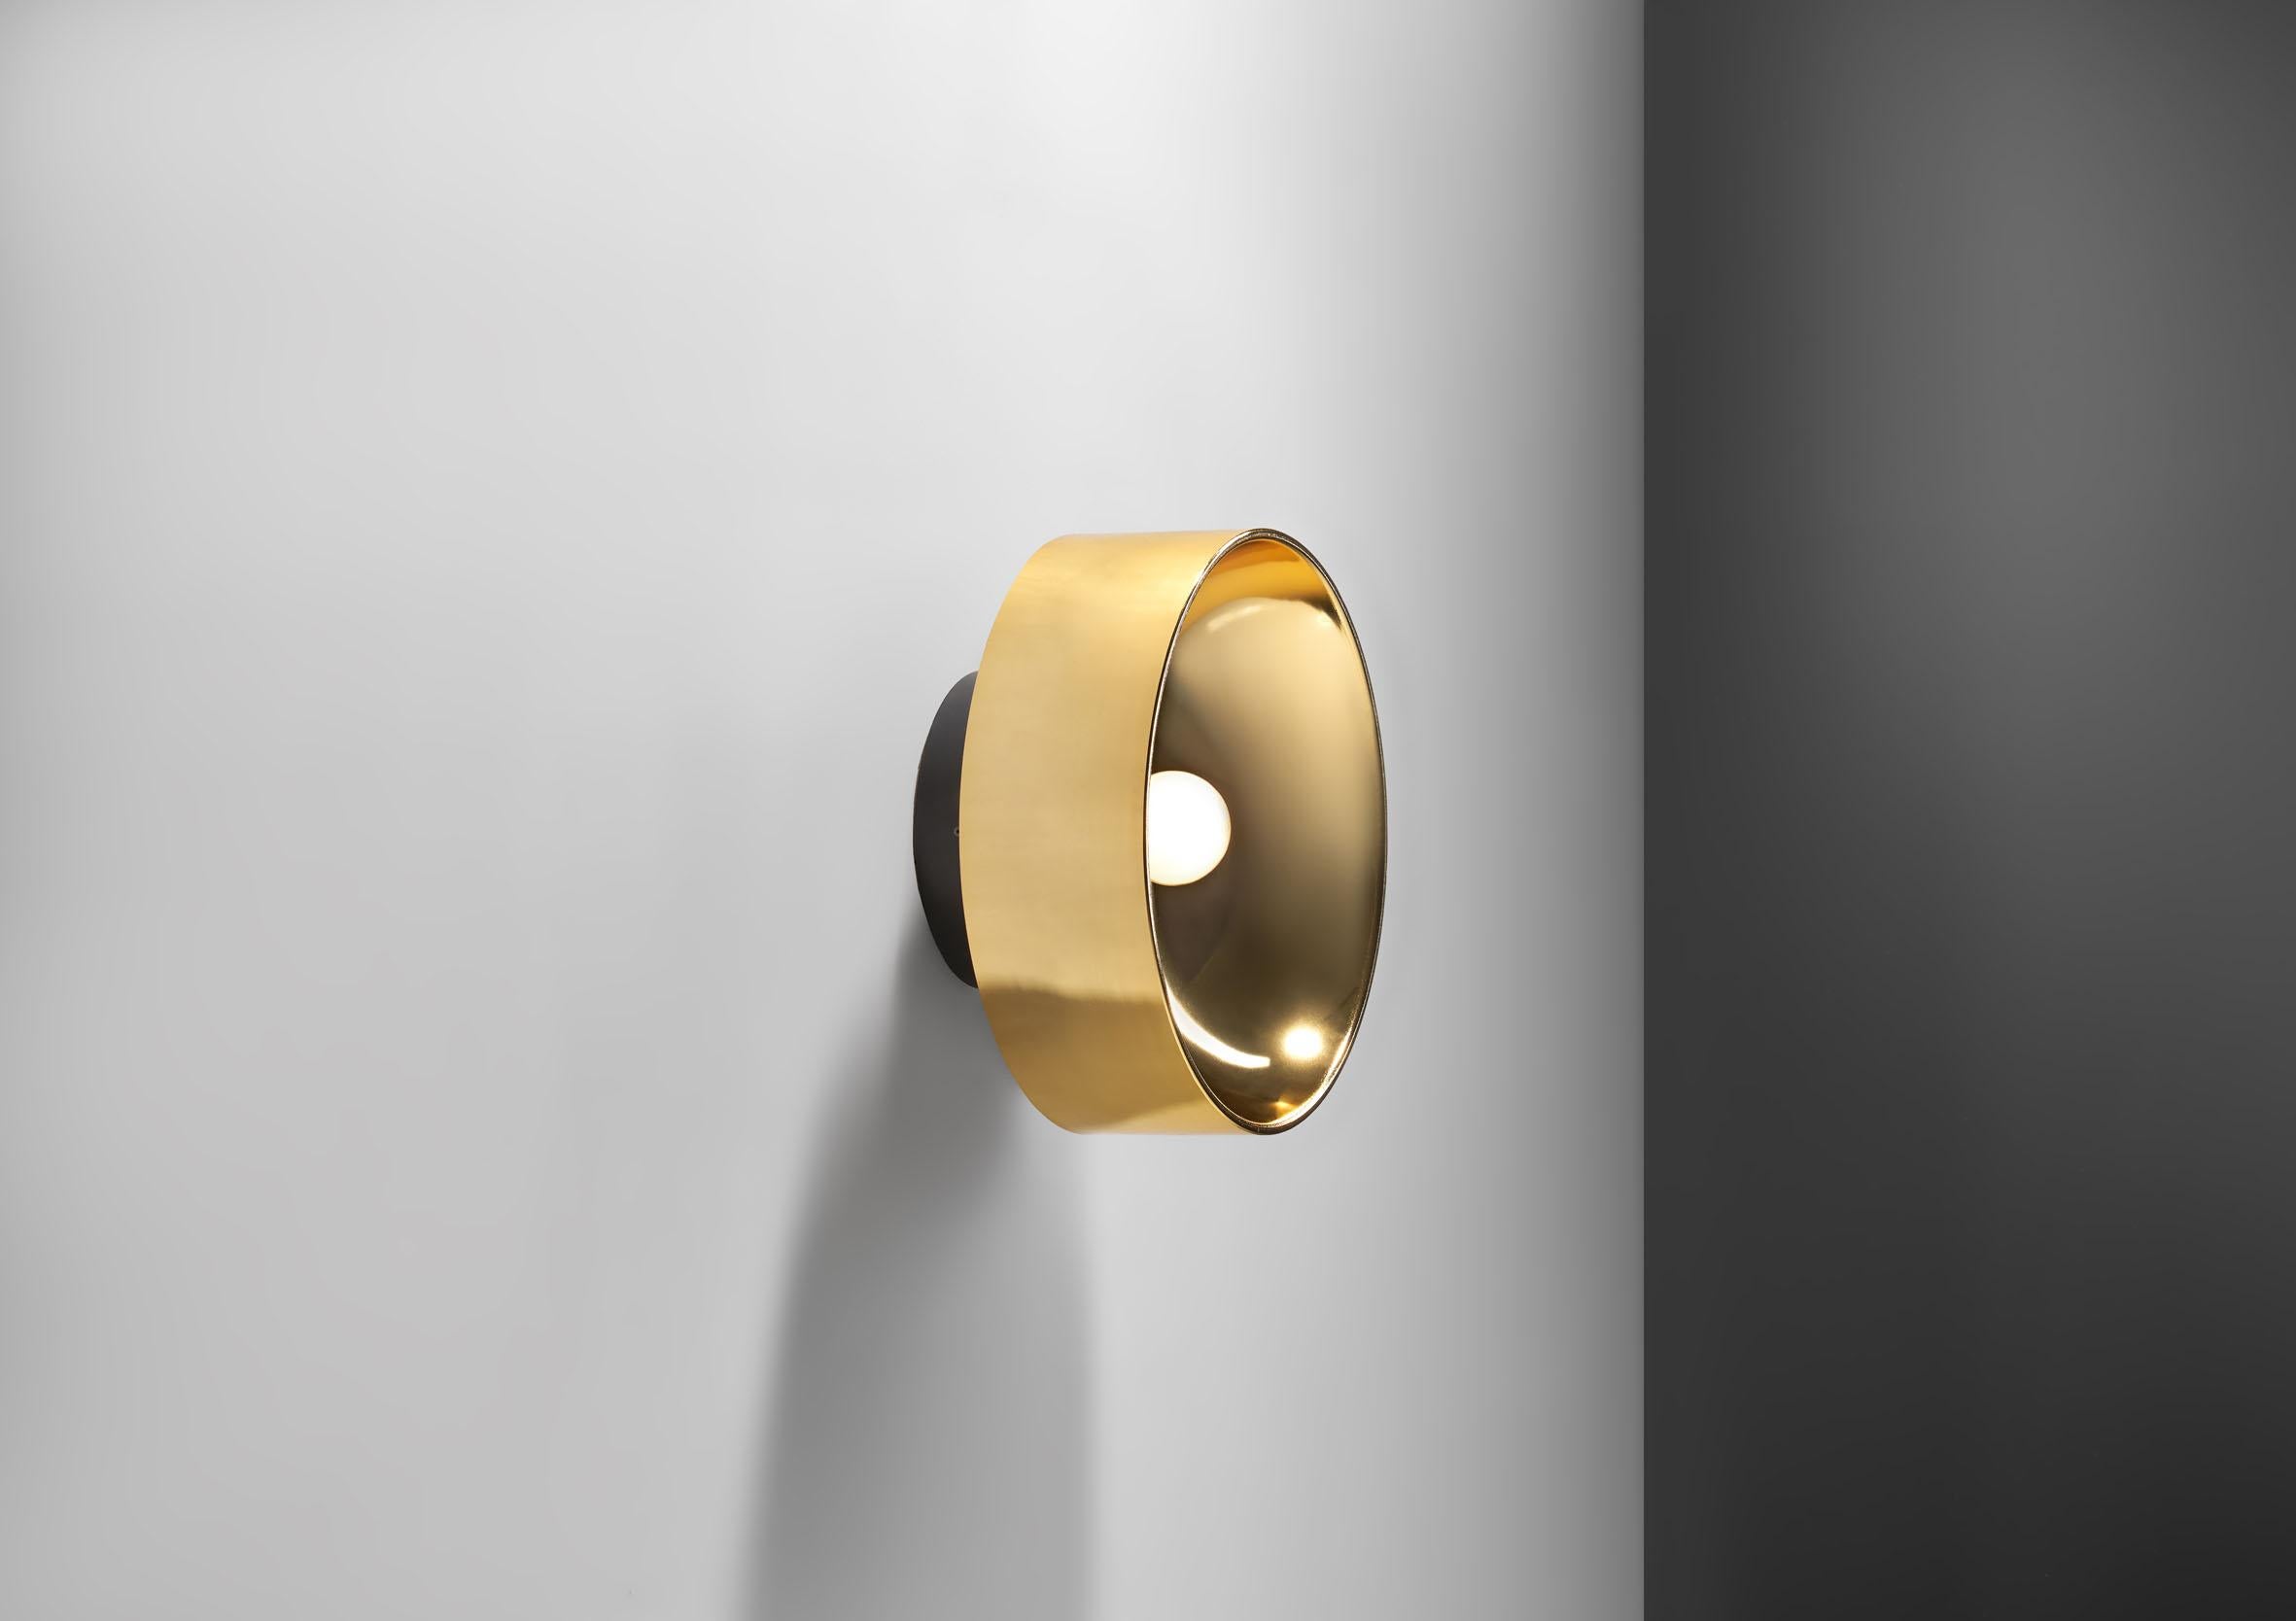 This stylish wall scone was designed by Peter Celsing for Falkenberg in 1966 for the cultural center Kulturhuset in Stockholm. 

The modernistic look is achieved by simple, yet smart design of the silhouette. The yellow brass body gently reflects